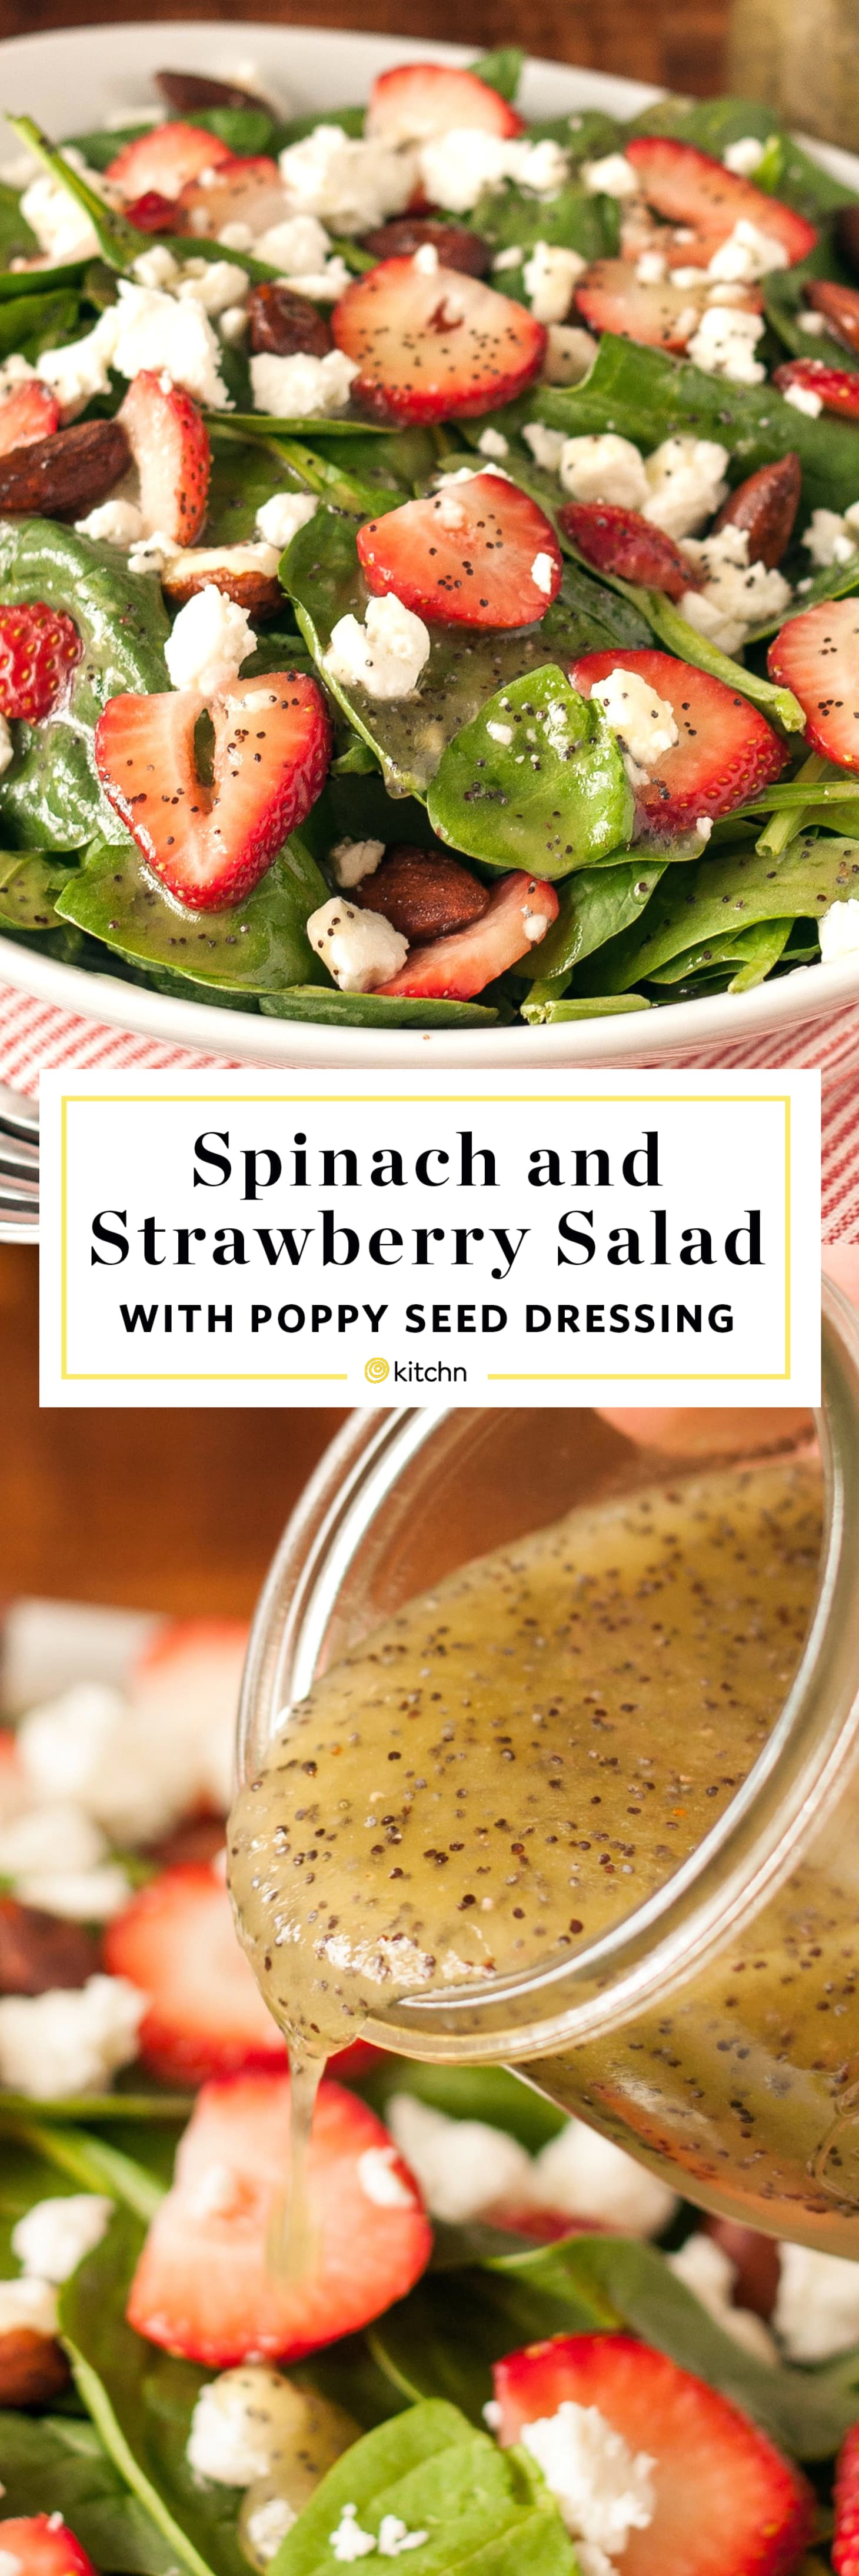 Spinach Strawberry Salad with Poppy Seed Dressing Recipe